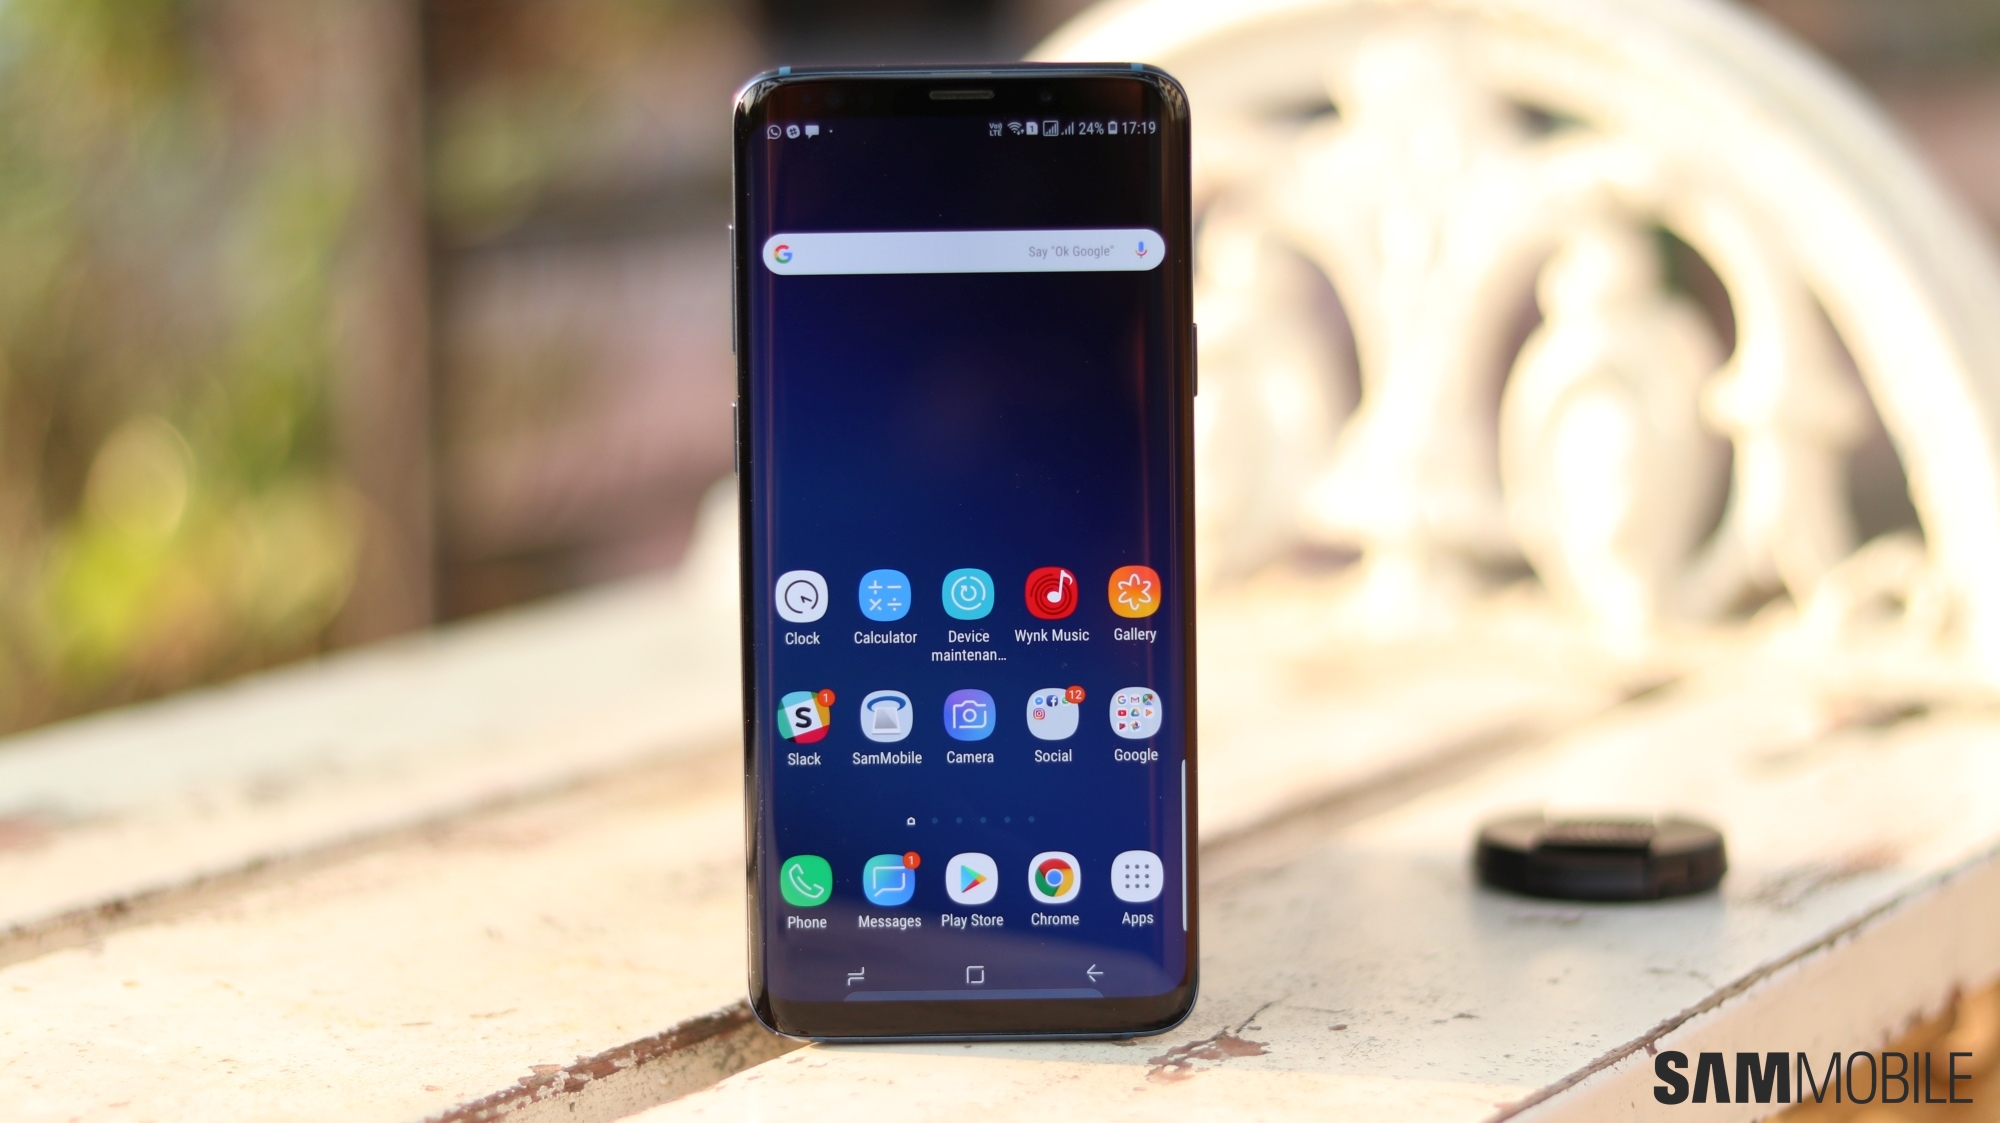 Samsung S9 Review: Should You Buy the Samsung Galaxy S9?